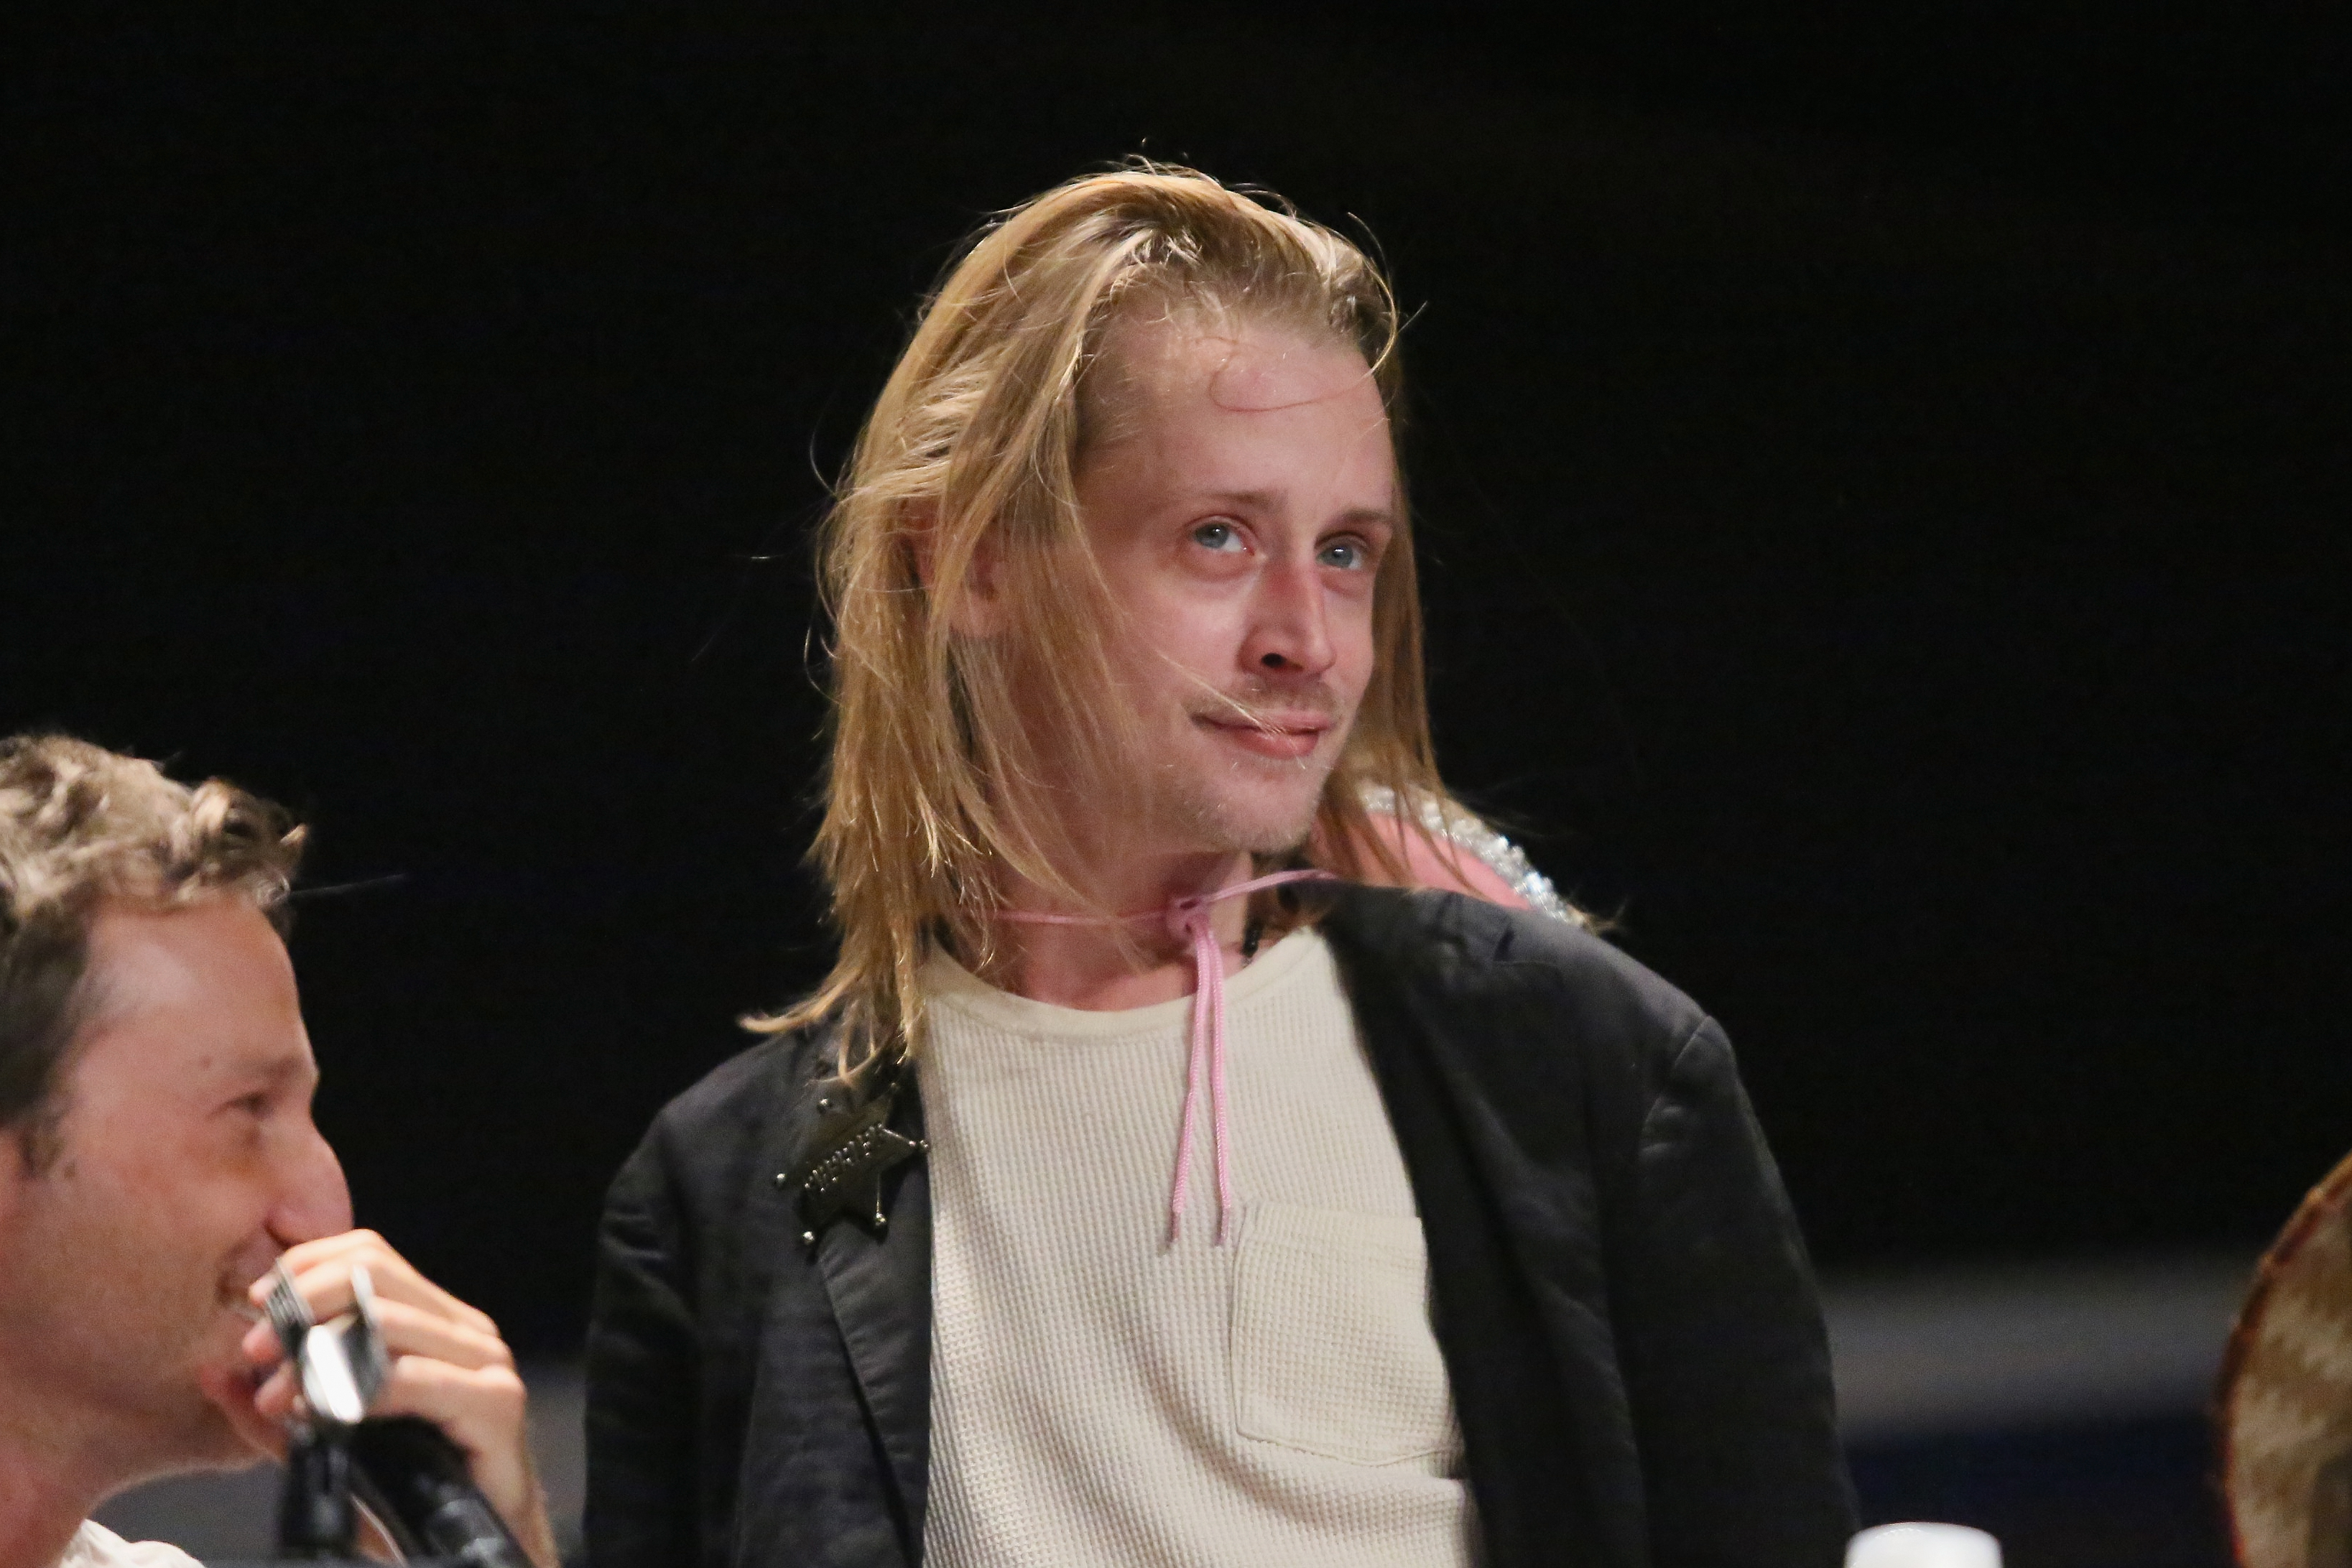 Macaulay Culkin at The Adult Swim RobotChicken Panel at New York Comic Con on October 10, 2014, in New York City | Source: Getty Images